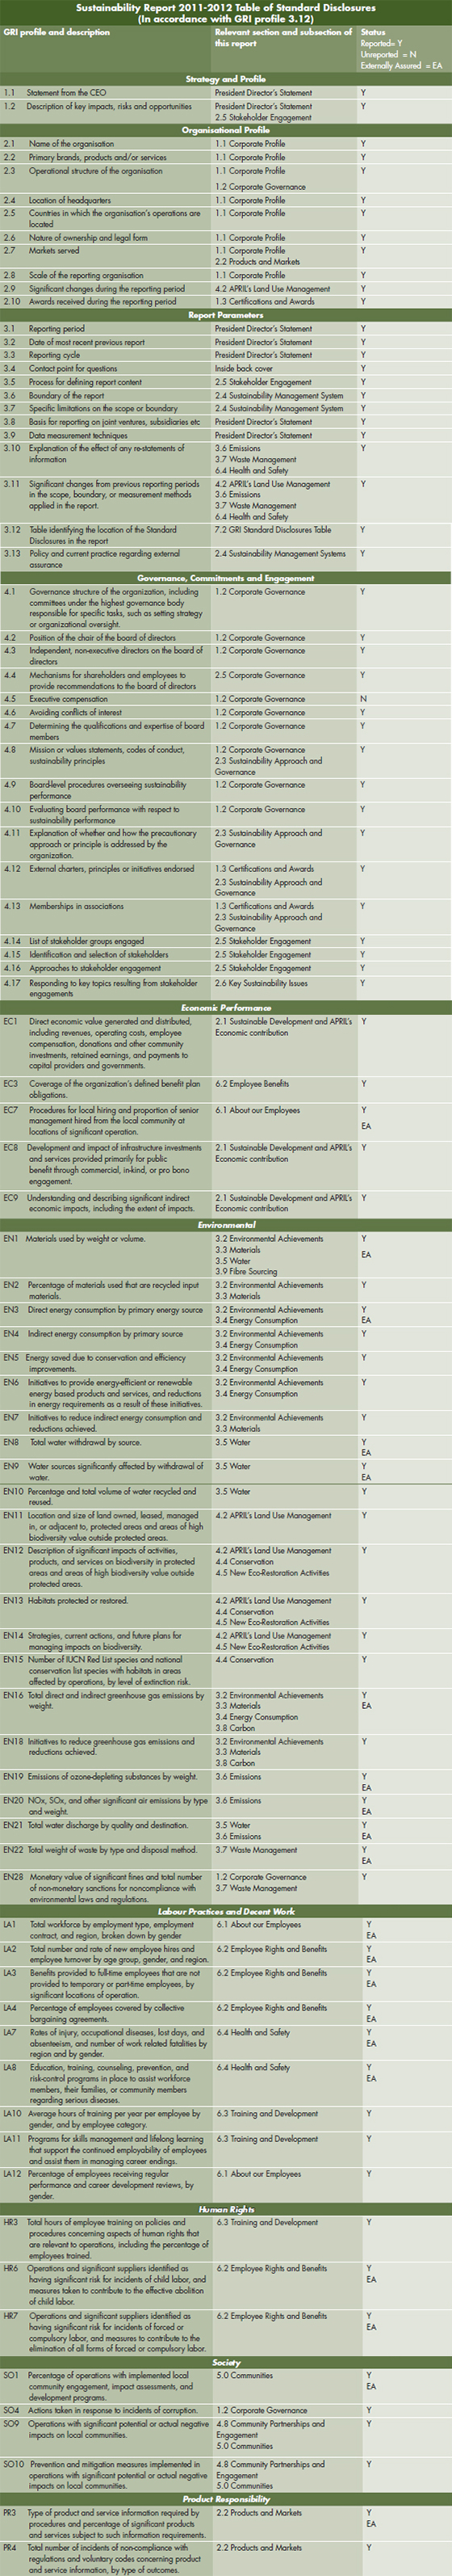 sustainability-report-2011-2012-table-of-standard-disclosures-combined